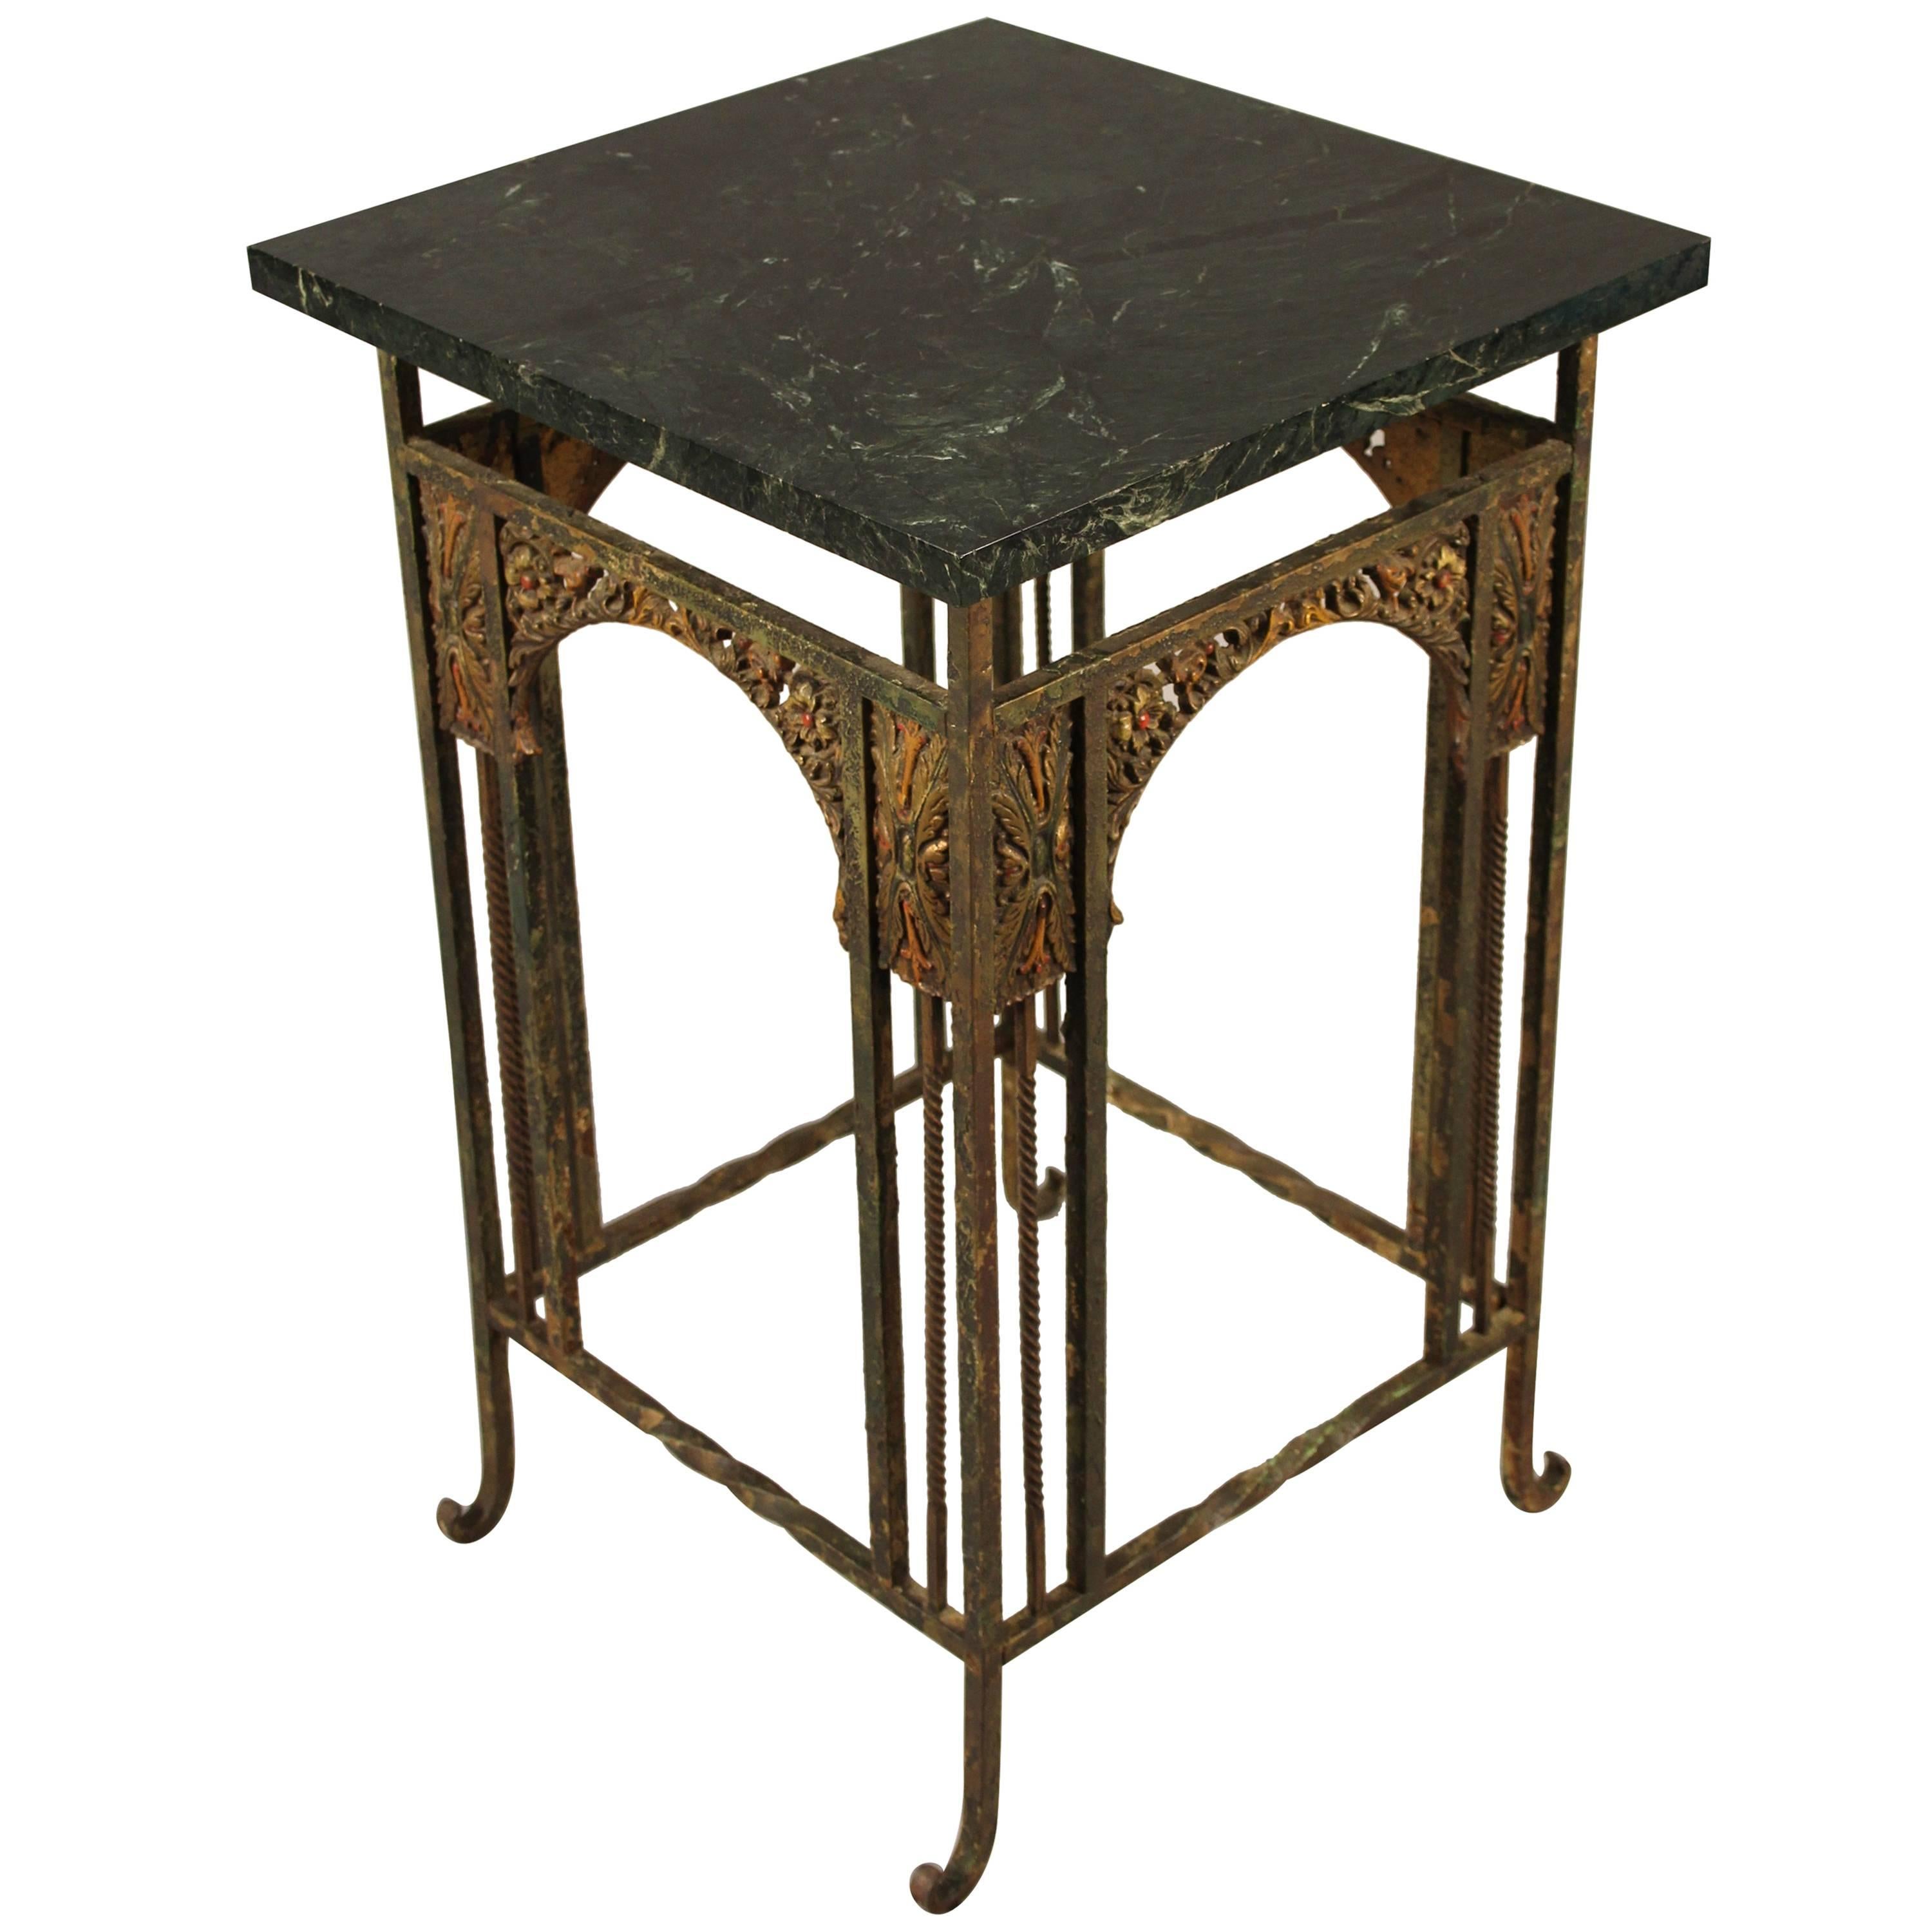 1920s Spanish Revival Iron Polychrome Side Table with Marble Top For Sale